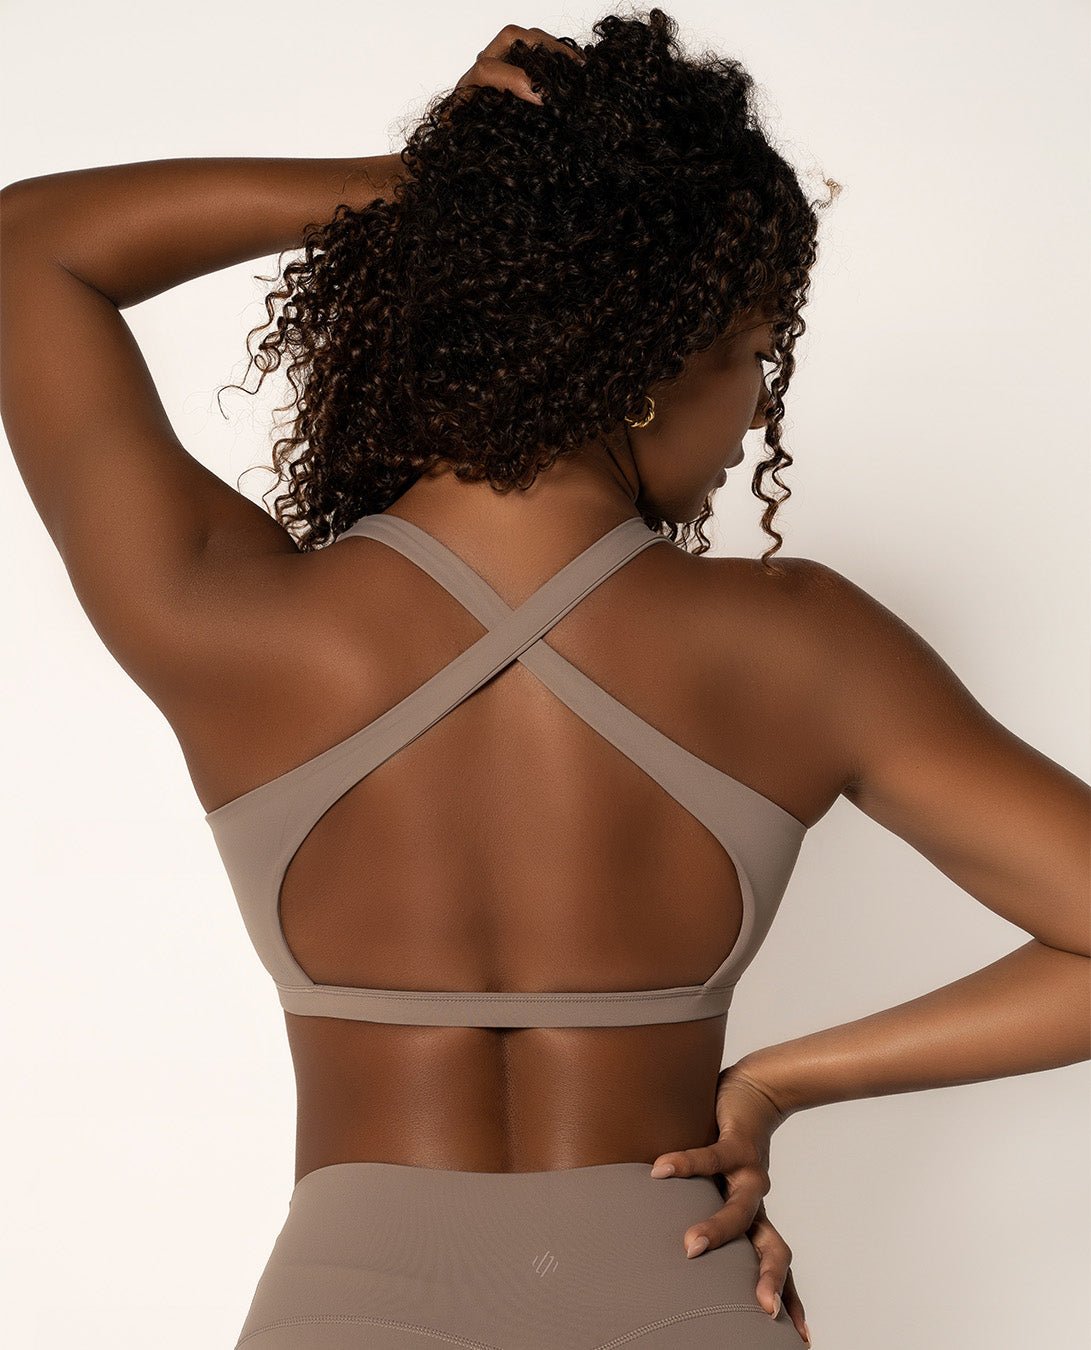 Icatchingcollections254, CHRLEISURE Sexy Cutout Bralette Cross Beauty Back  Women Bra Leisure Simple Soft No Rims Women's Lingerie Available For Ksh  899. Contact 0